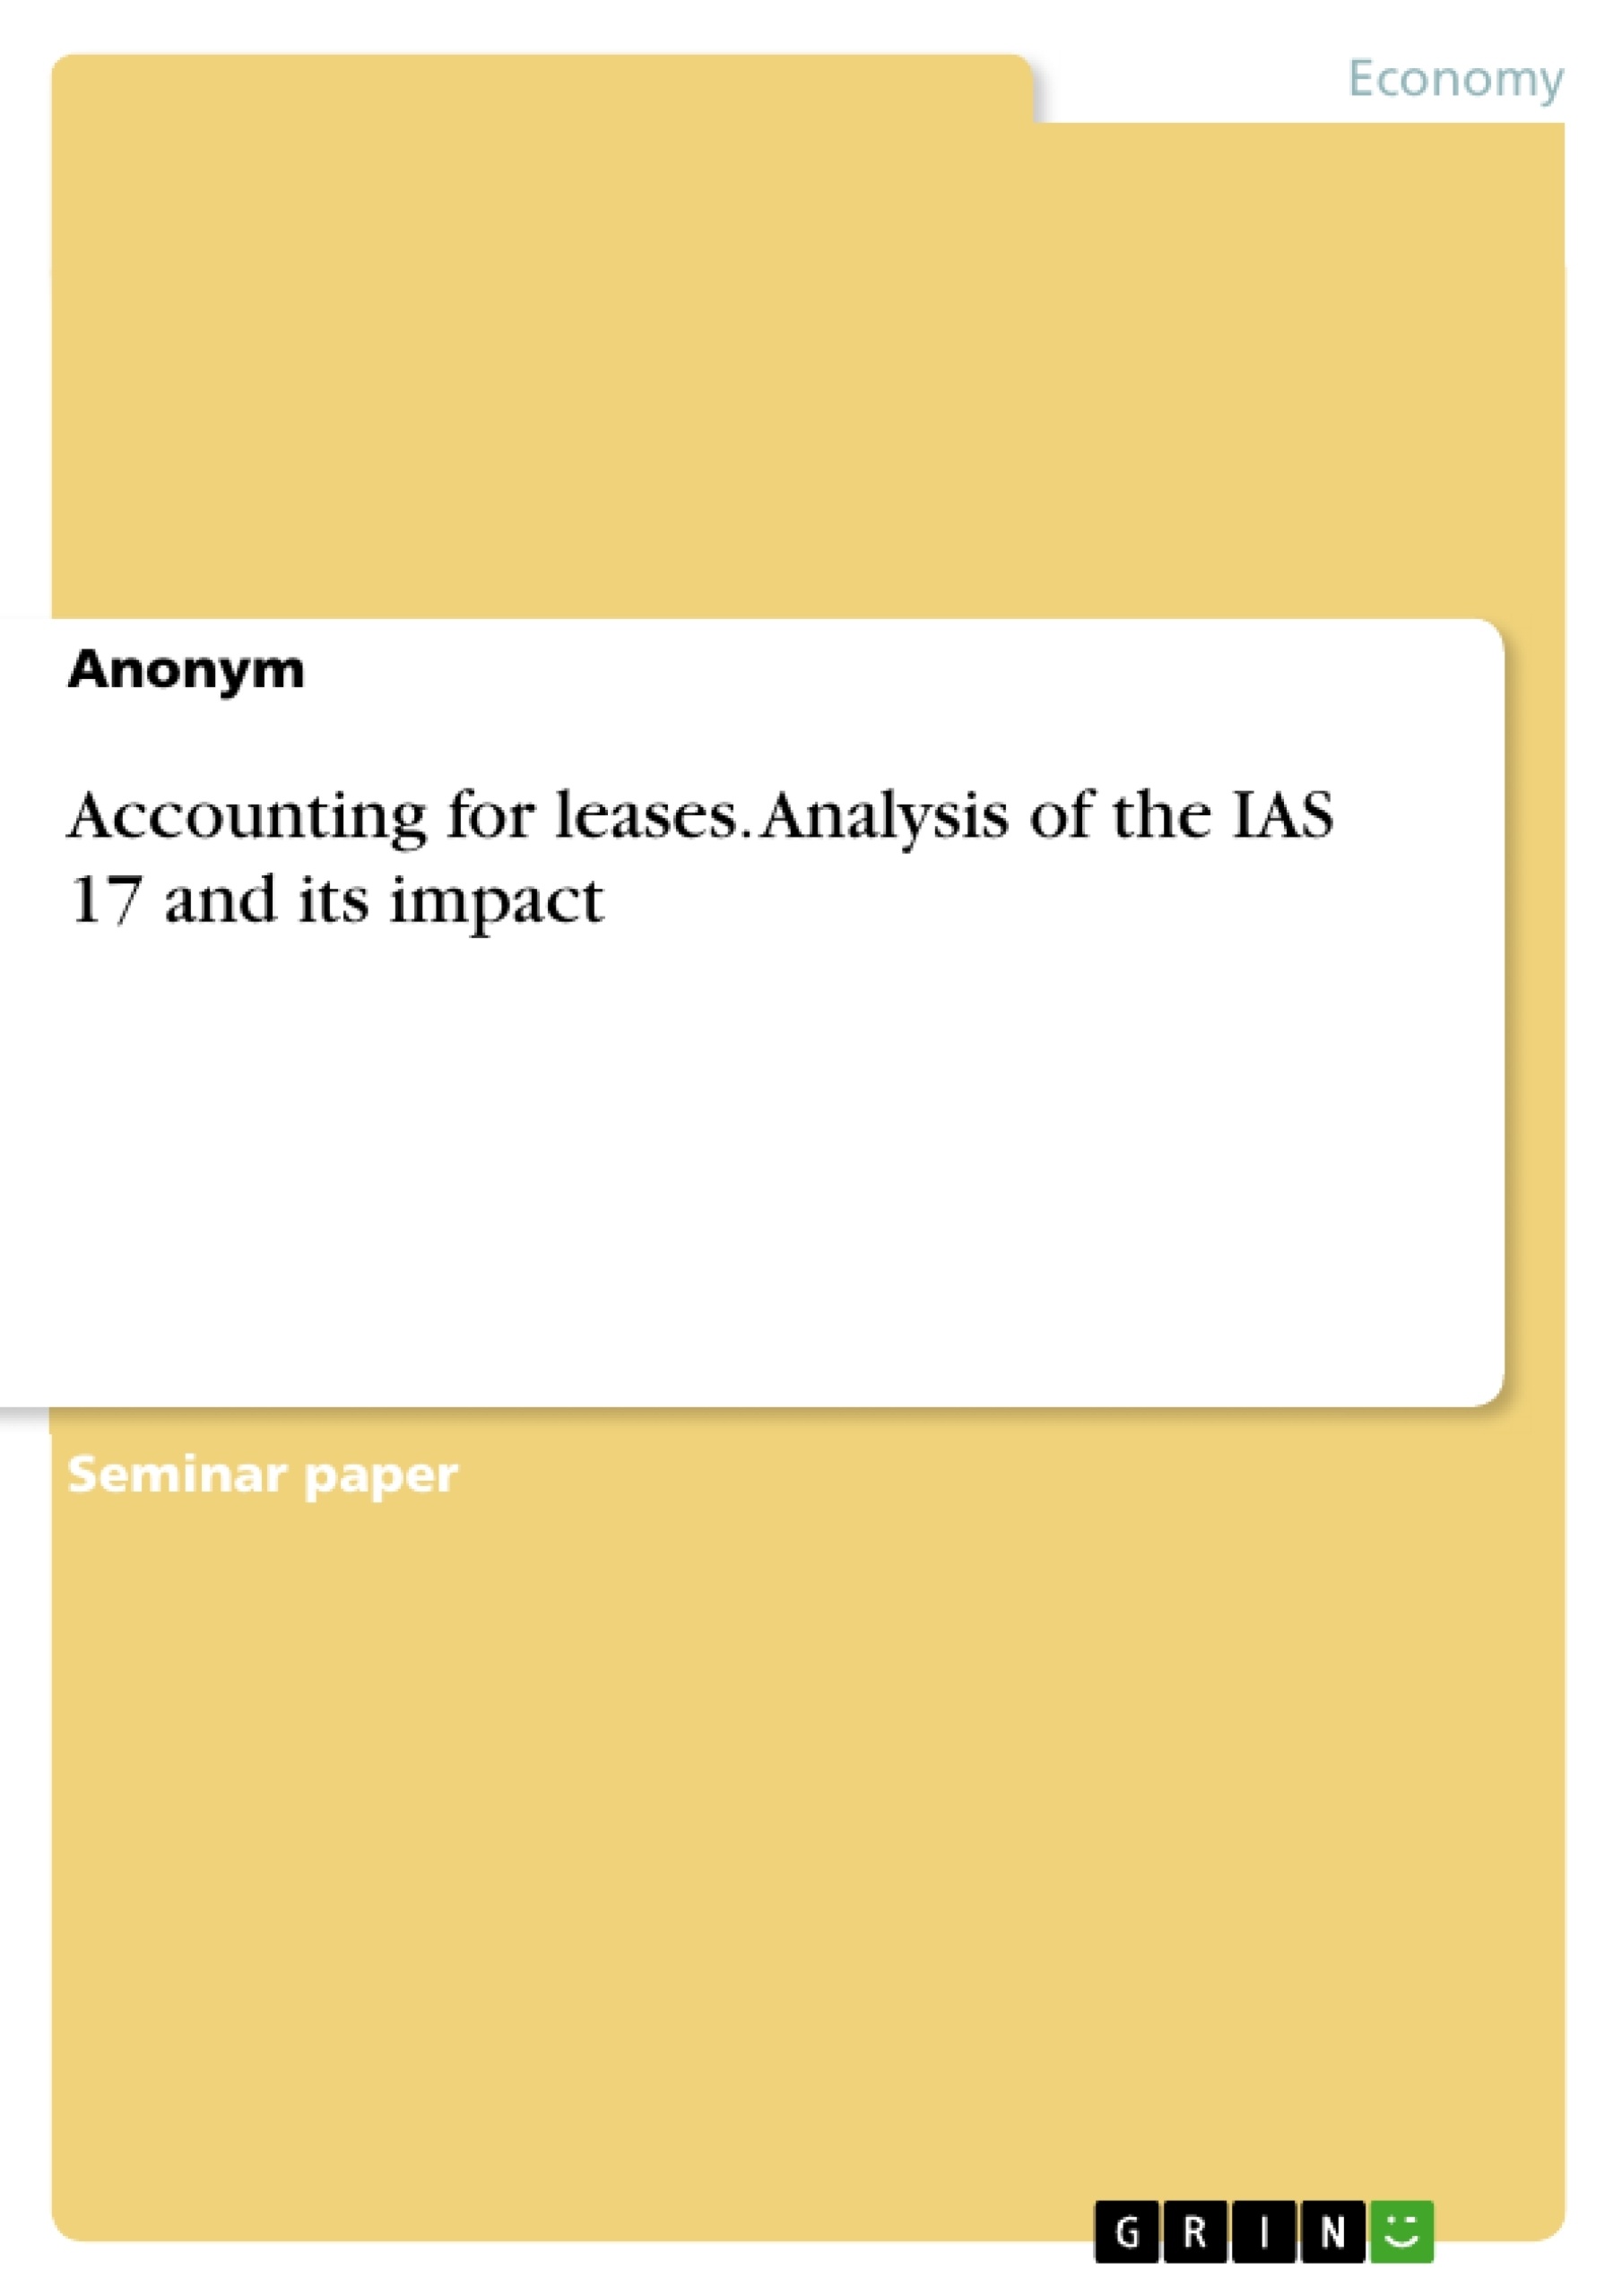 Titre: Accounting for leases. Analysis of the IAS 17 and its impact